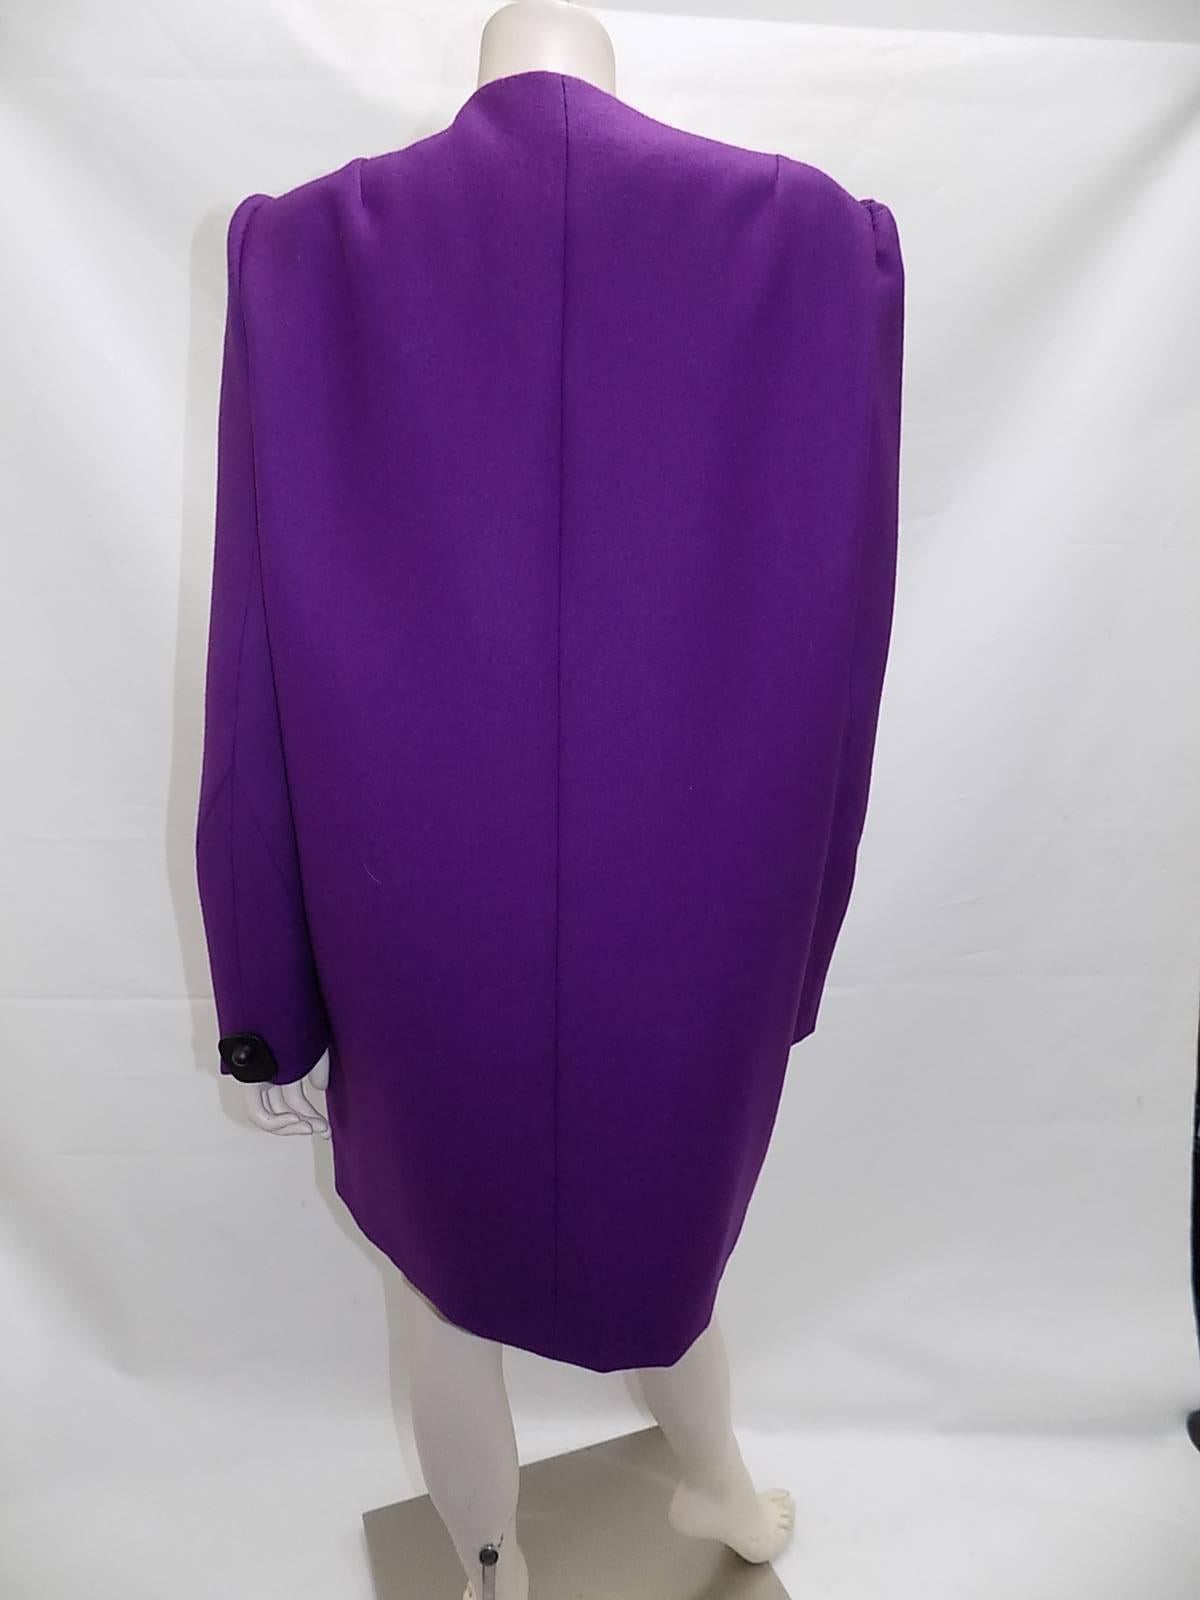 New With Tags Yves Saint Laurent Purple wool  Coat W Leather Buttons sz 46 2